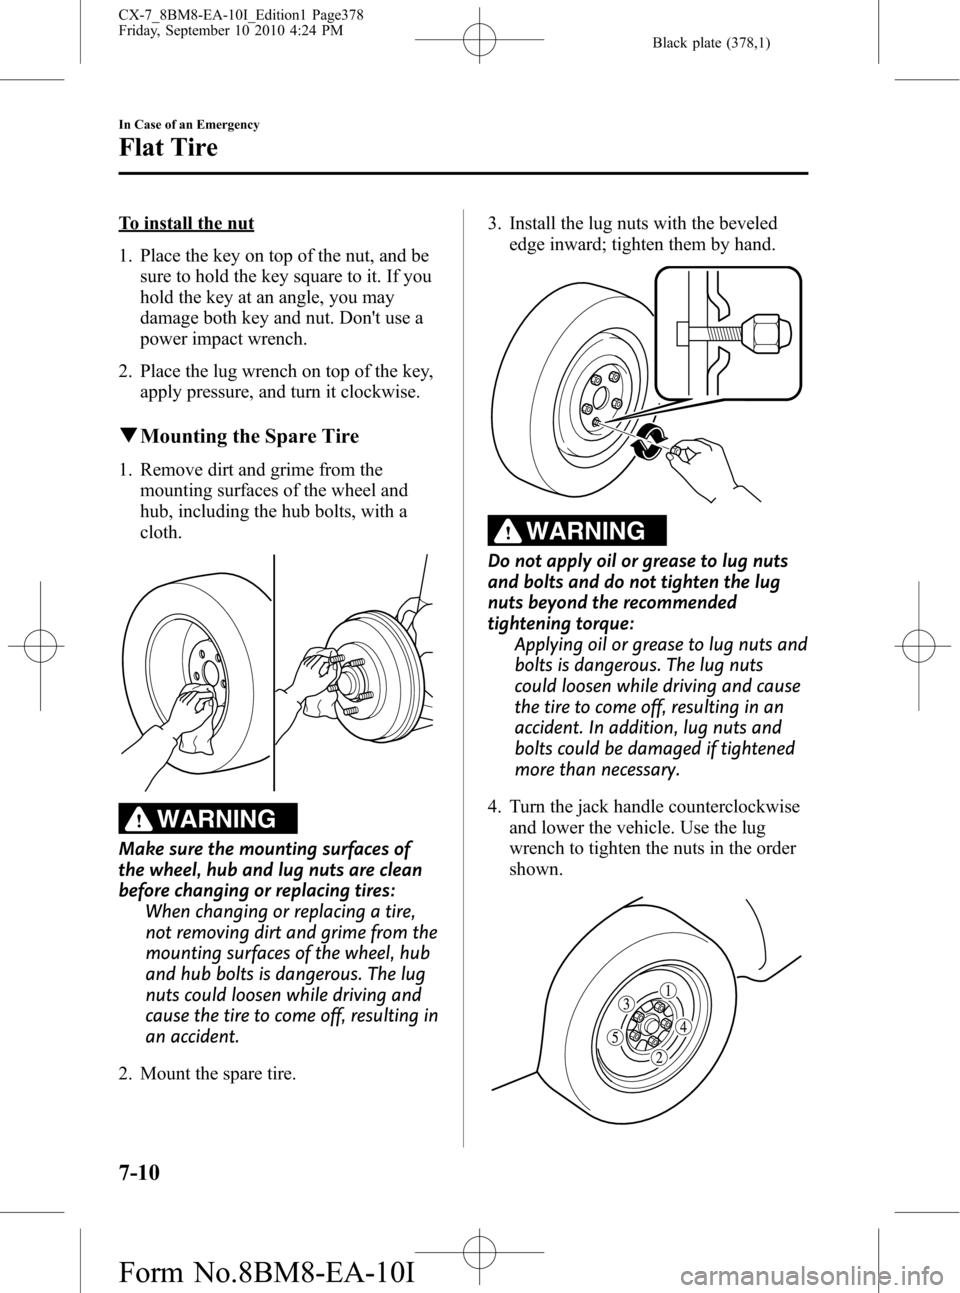 MAZDA MODEL CX-7 2011  Owners Manual (in English) Black plate (378,1)
To install the nut
1. Place the key on top of the nut, and be
sure to hold the key square to it. If you
hold the key at an angle, you may
damage both key and nut. Dont use a
power